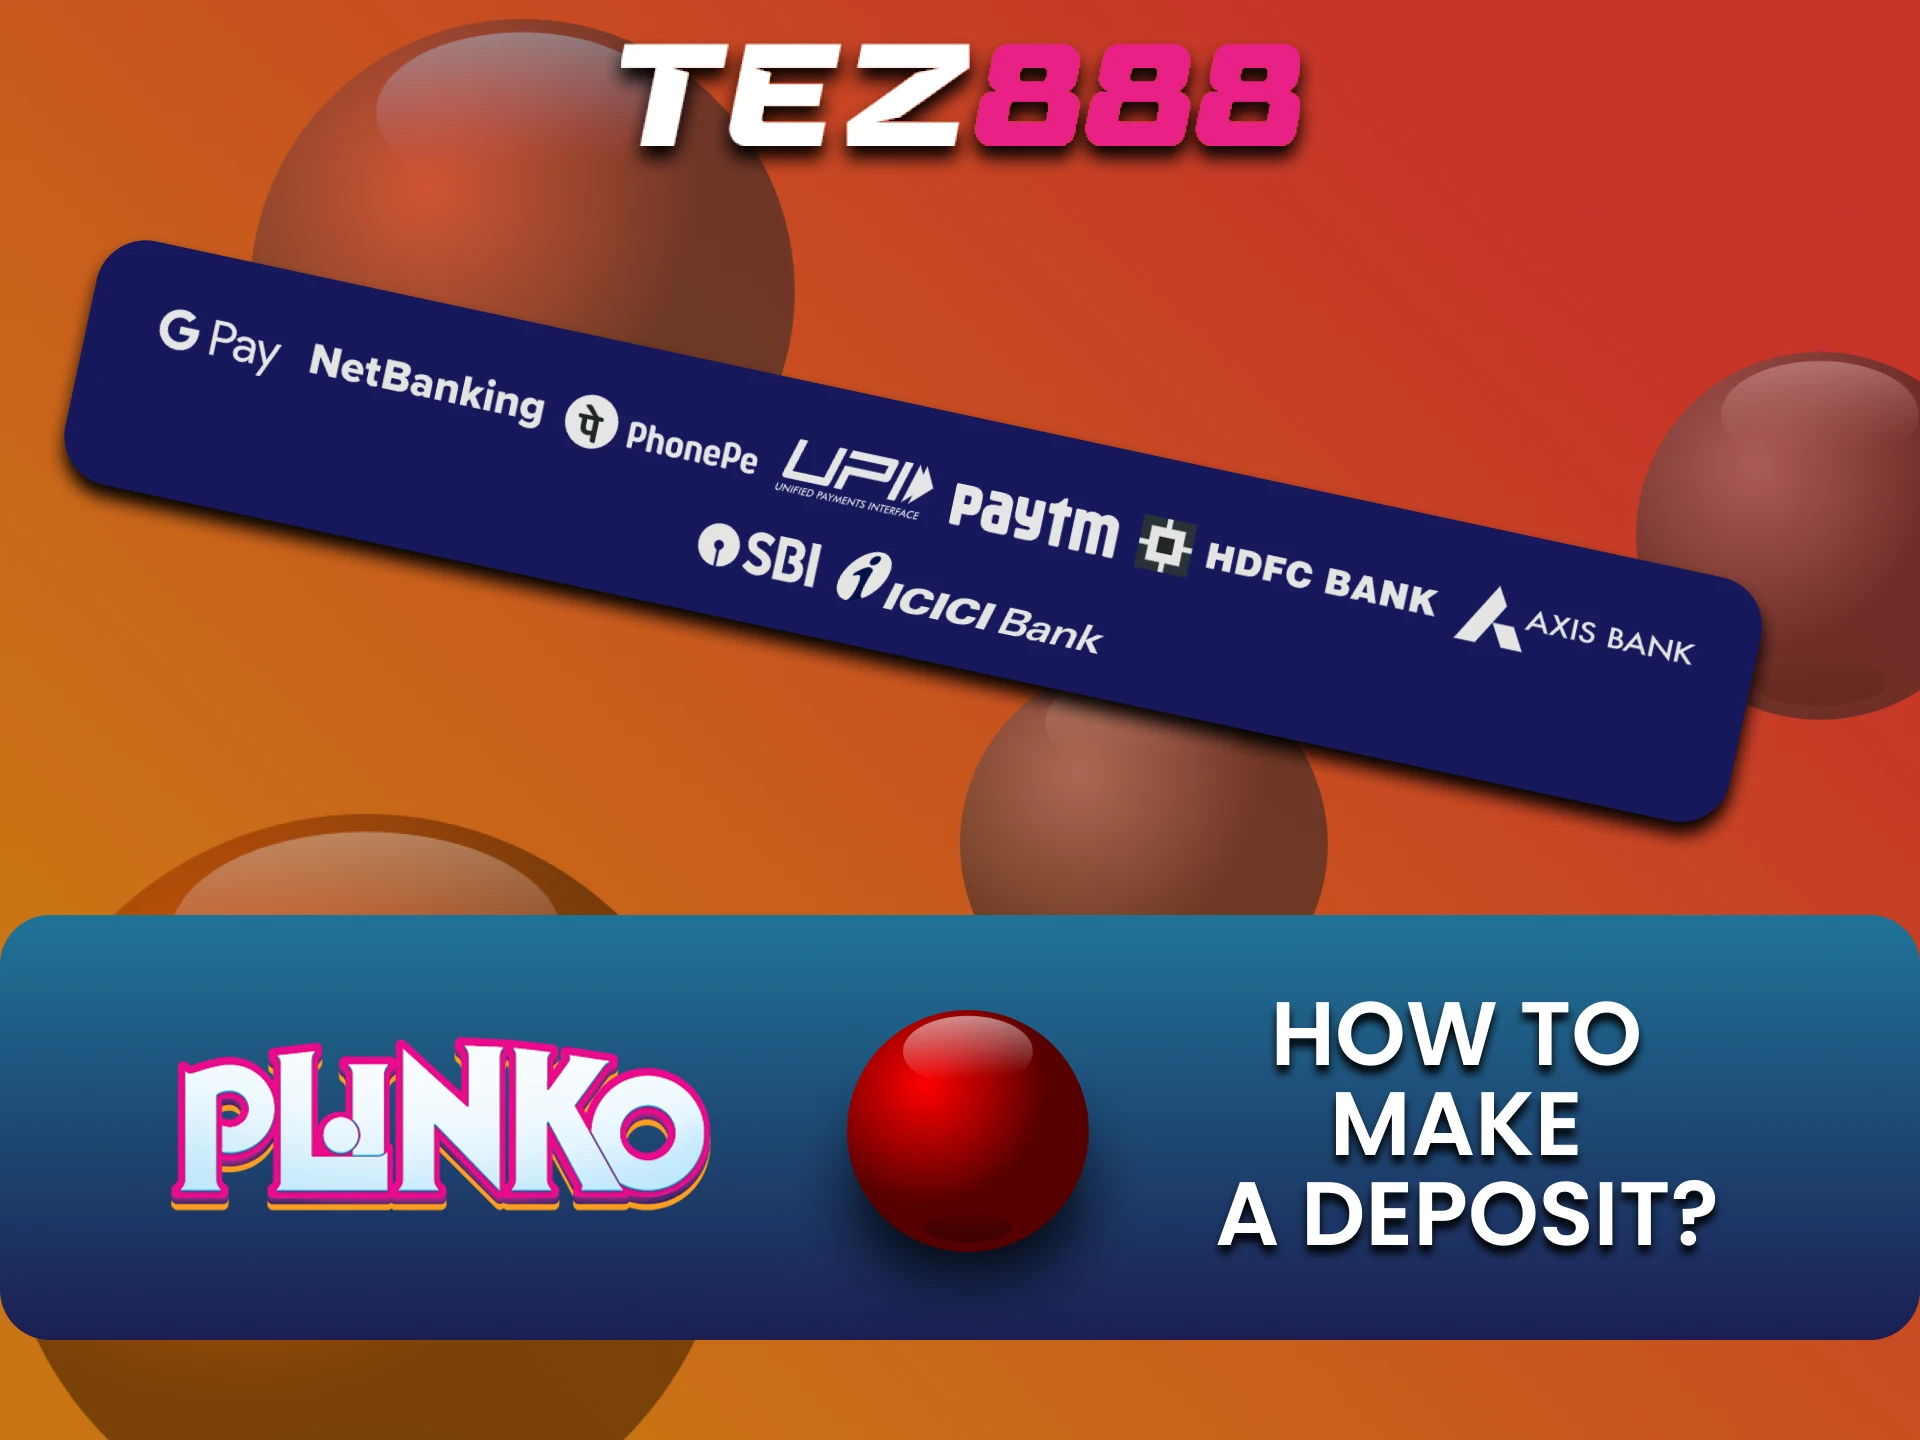 Explore ways to top up your funds on the Tez888 website for the game Plinko.